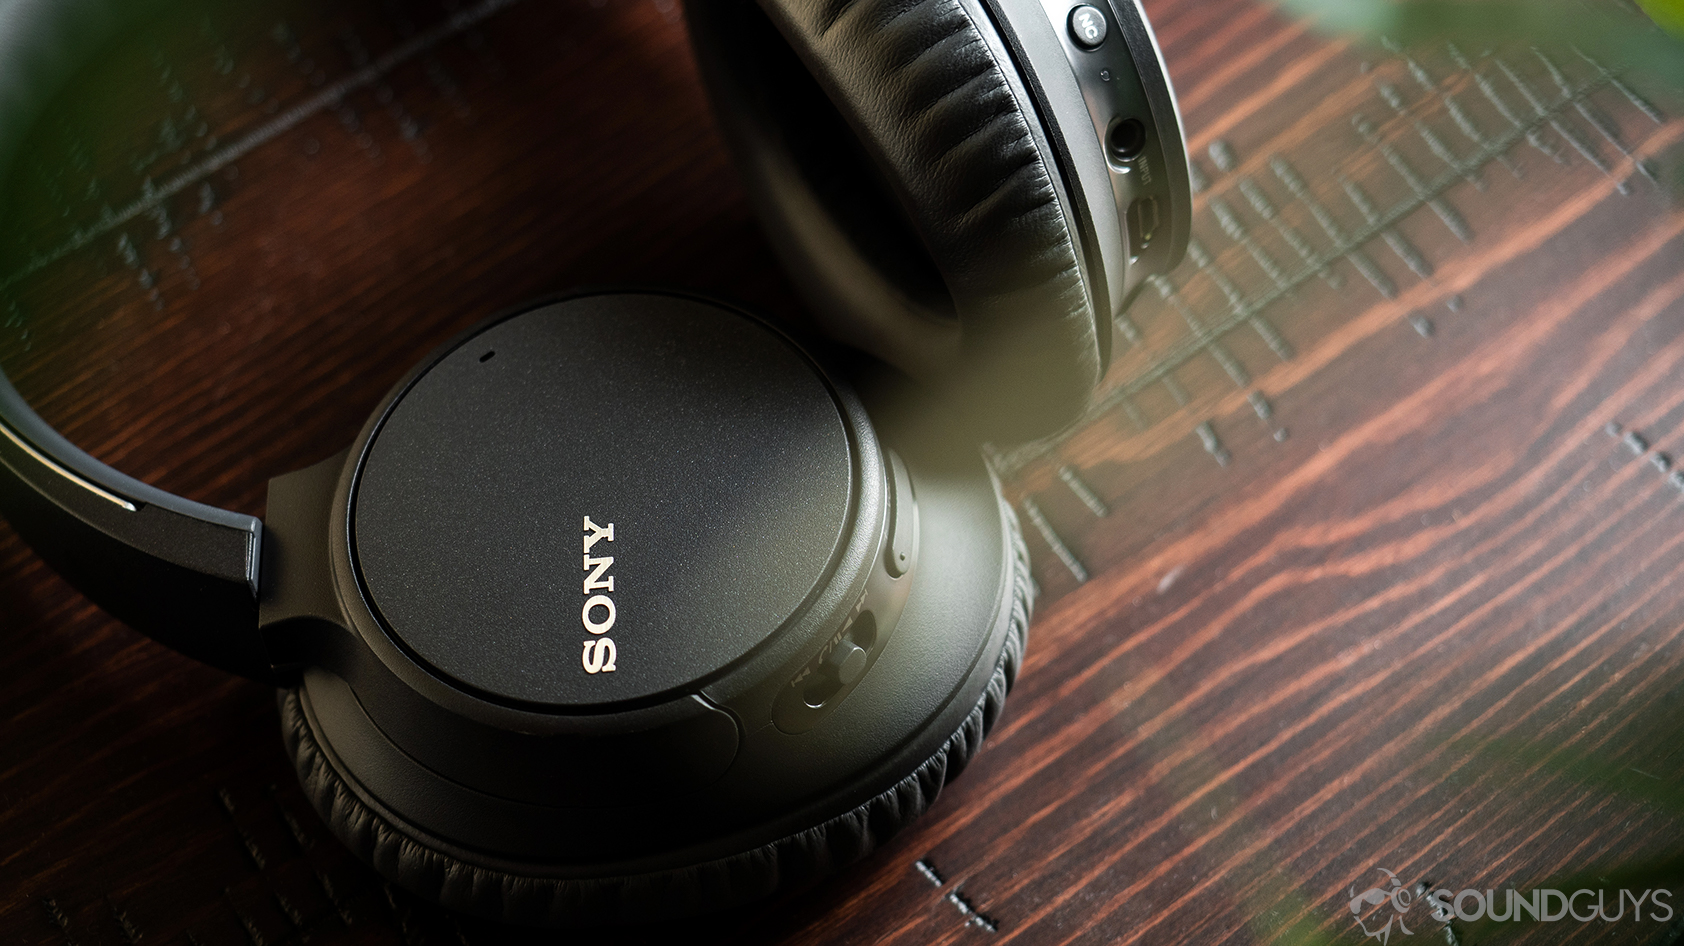 Sony WH-CH700N: Image of the headphones with one ear cup slightly rotated and the other one flat against a striated wood surface.